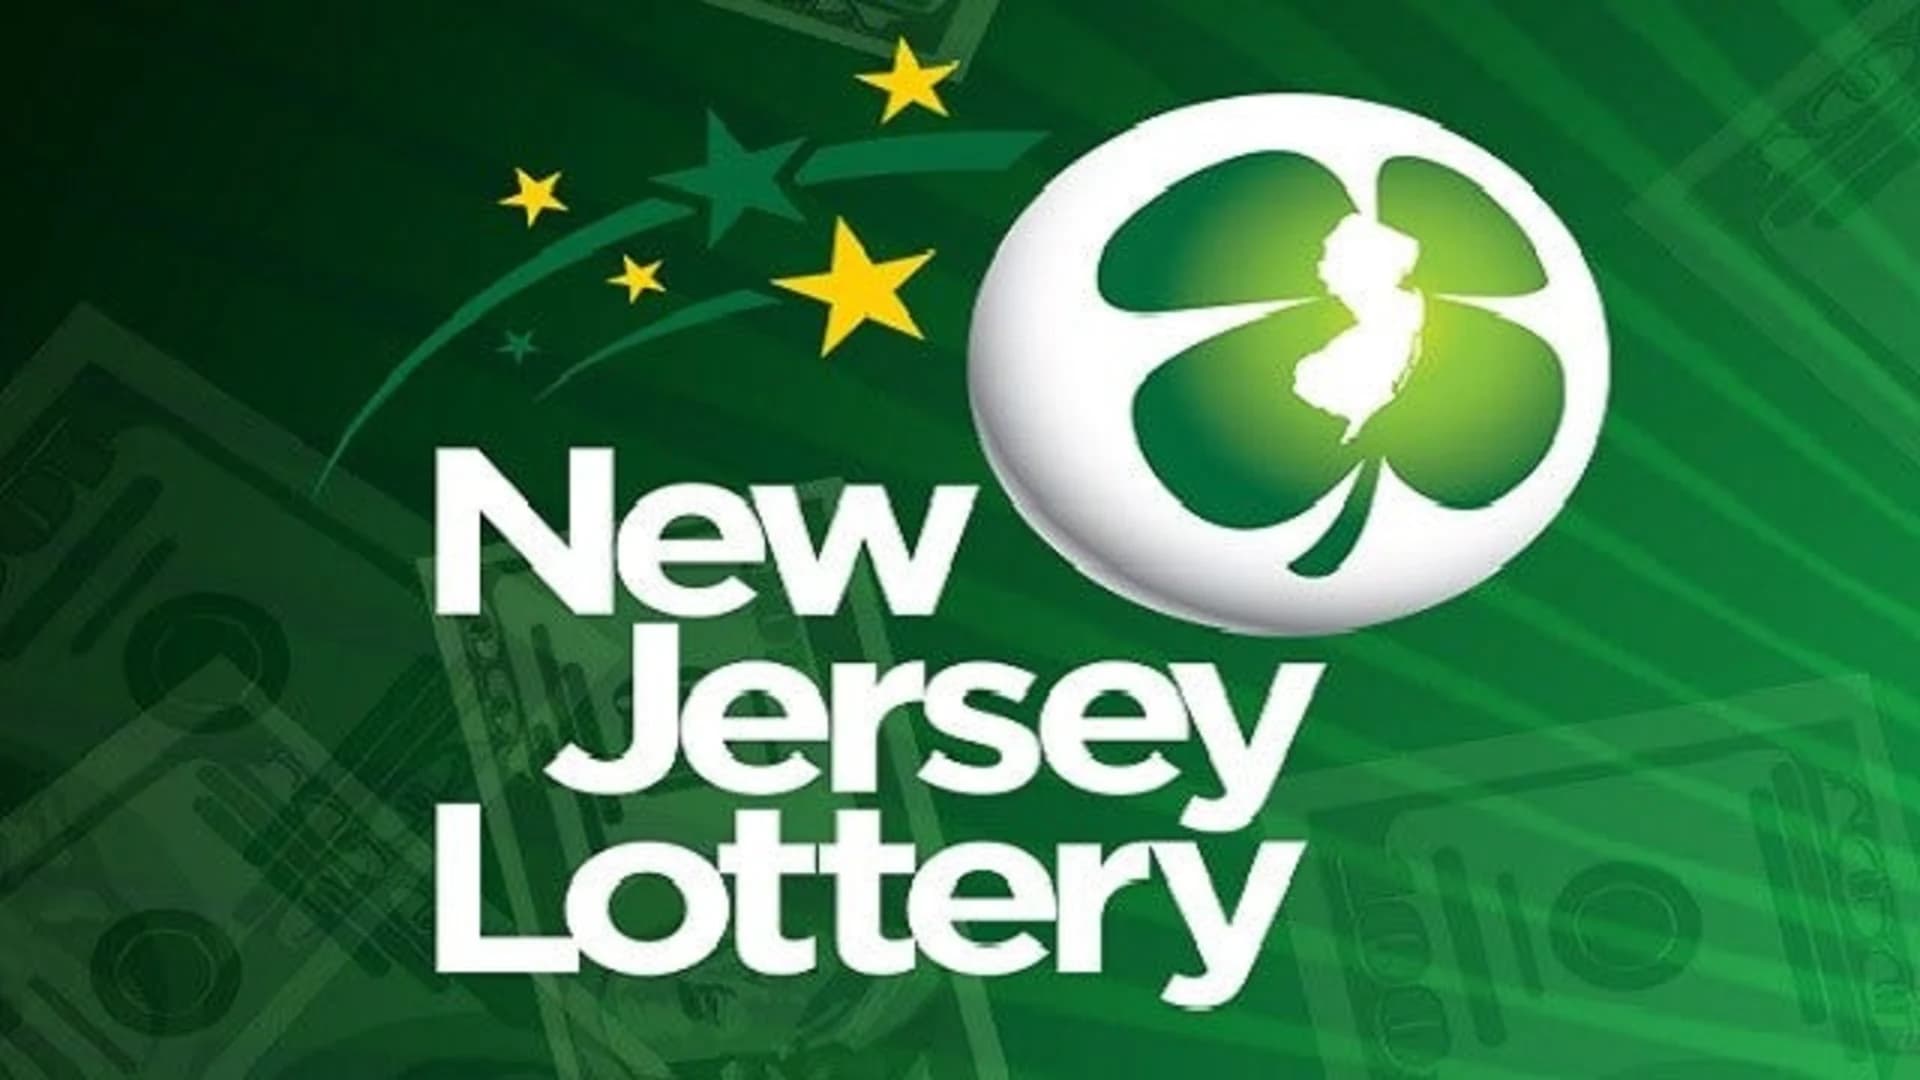 New Jersey Lottery sales drop in 2017